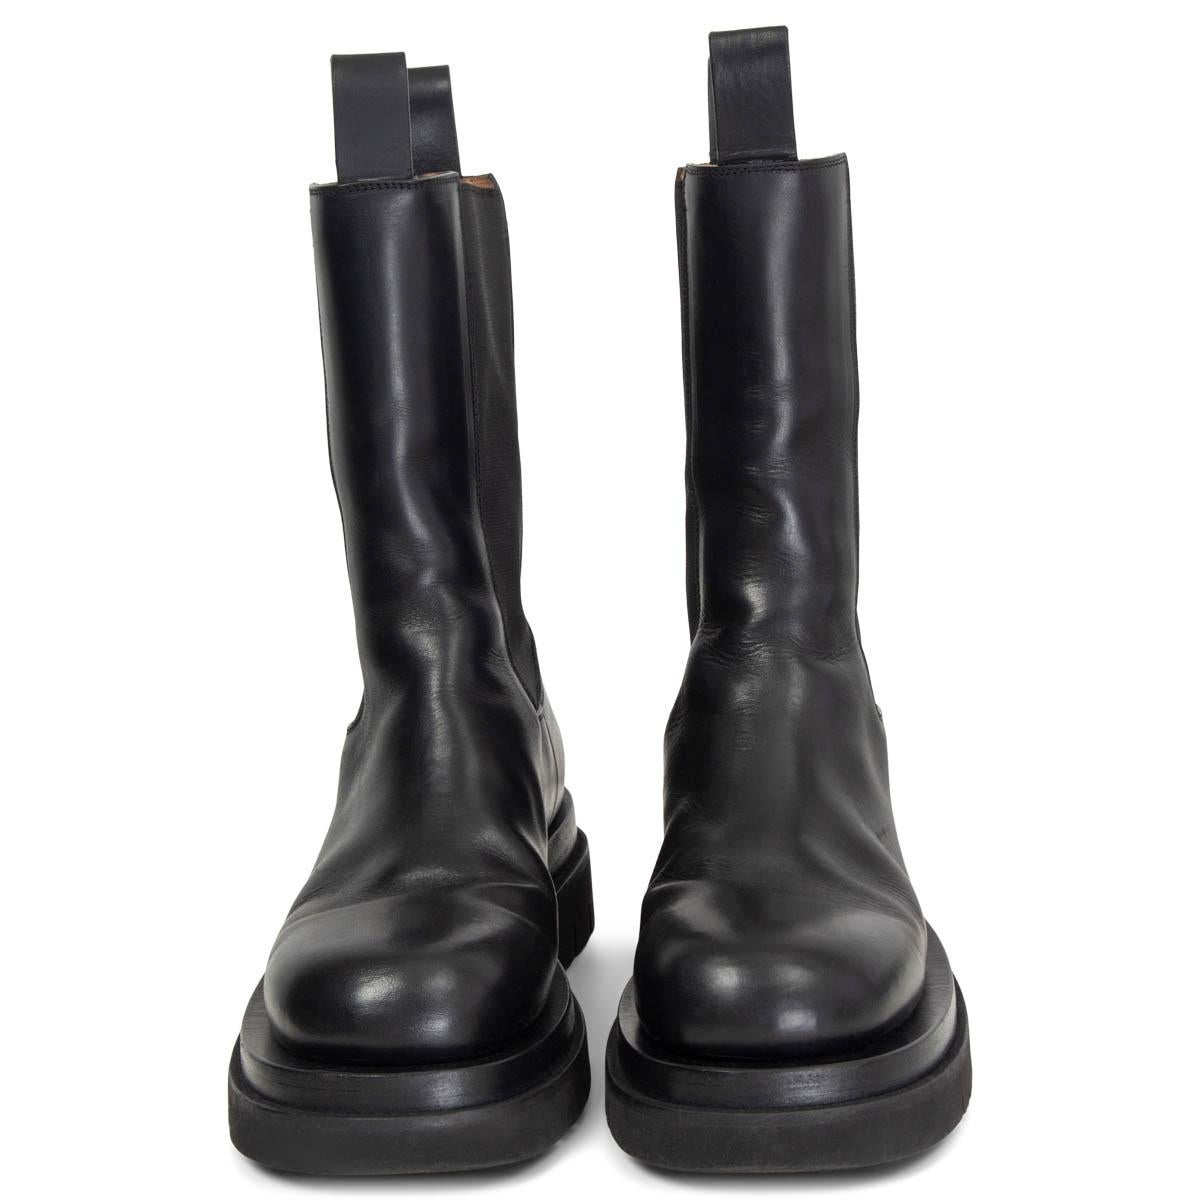 100% authentic Bottega Veneta Lug mid-calf boots in black calfskin uppers set on lugged rubber soles. Elasticated side panels with tonal pull tabs. Have been worn and are in excellent condition. Come with dust bag. 

Measurements
Imprinted